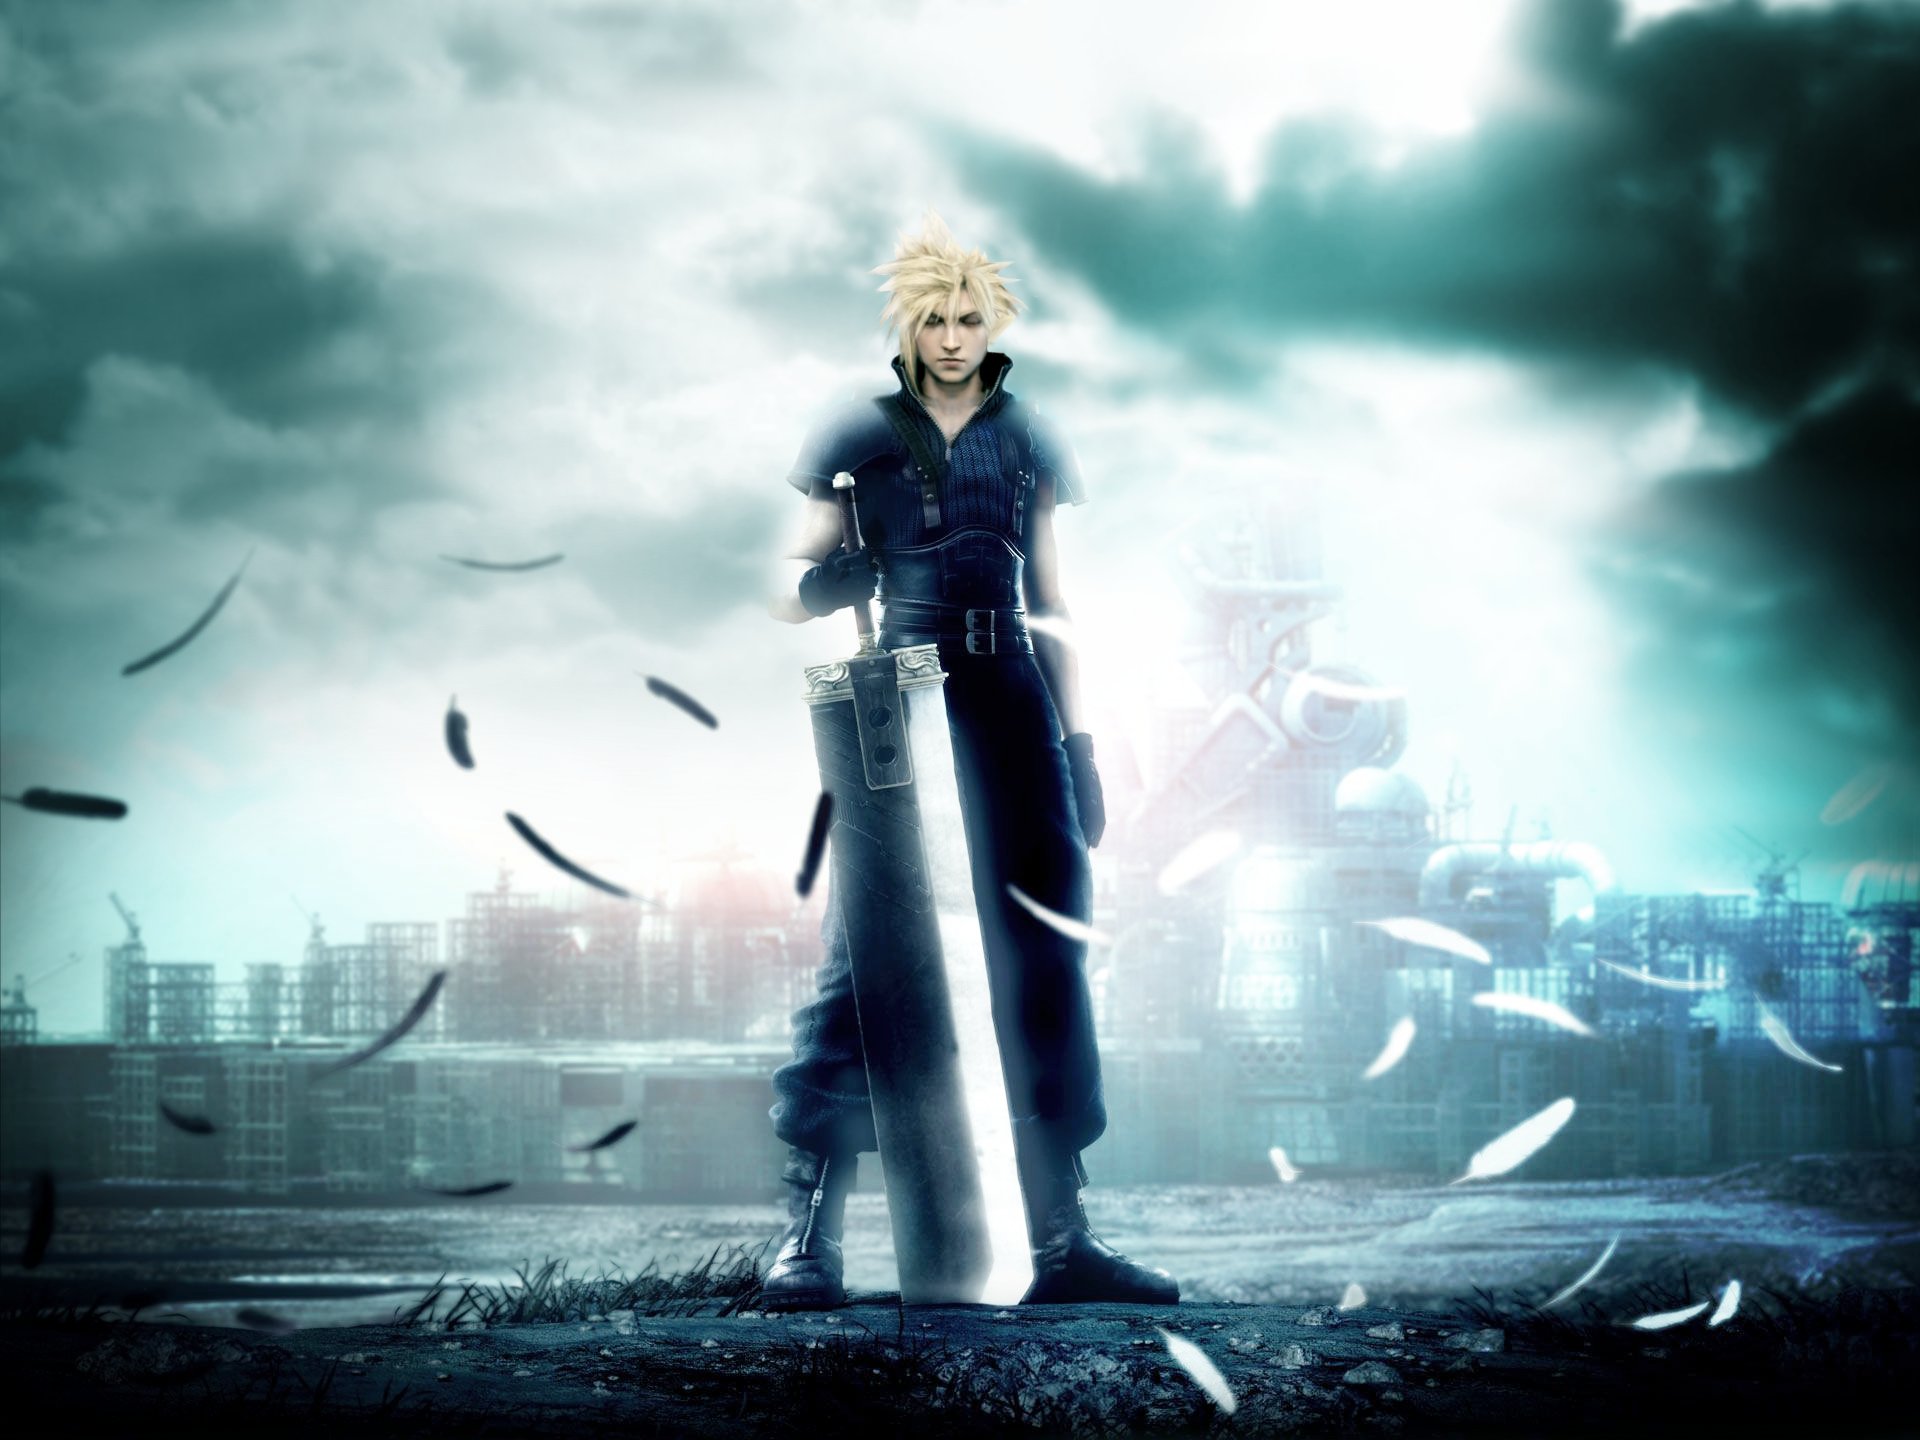 Anime characters from Final Fantasy VII: Advent Children stand in dramatic pose against a vibrant background.